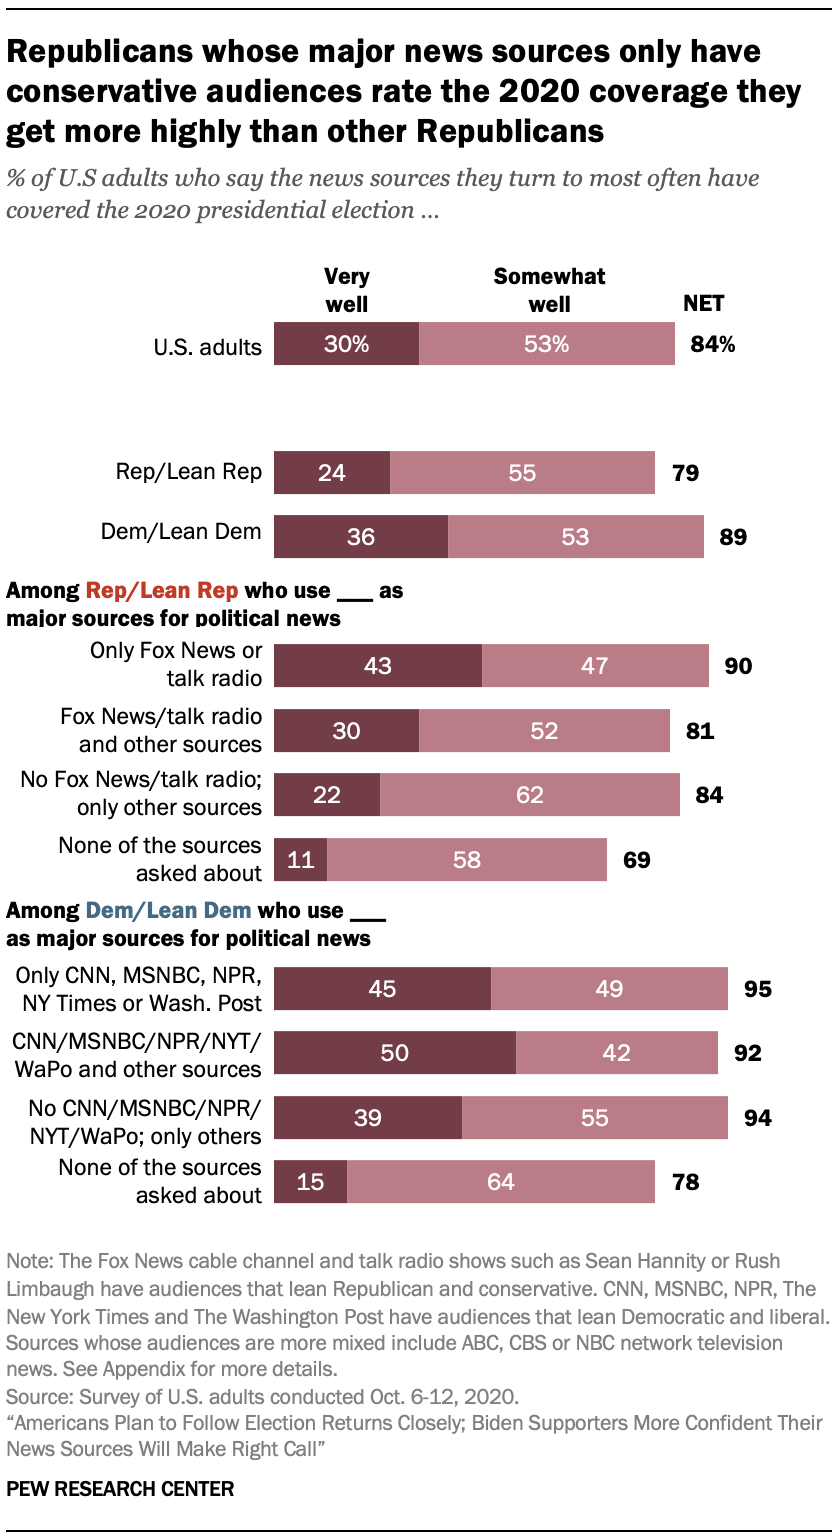 Republicans whose major news sources only have conservative audiences rate the 2020 coverage they get more highly than other Republicans